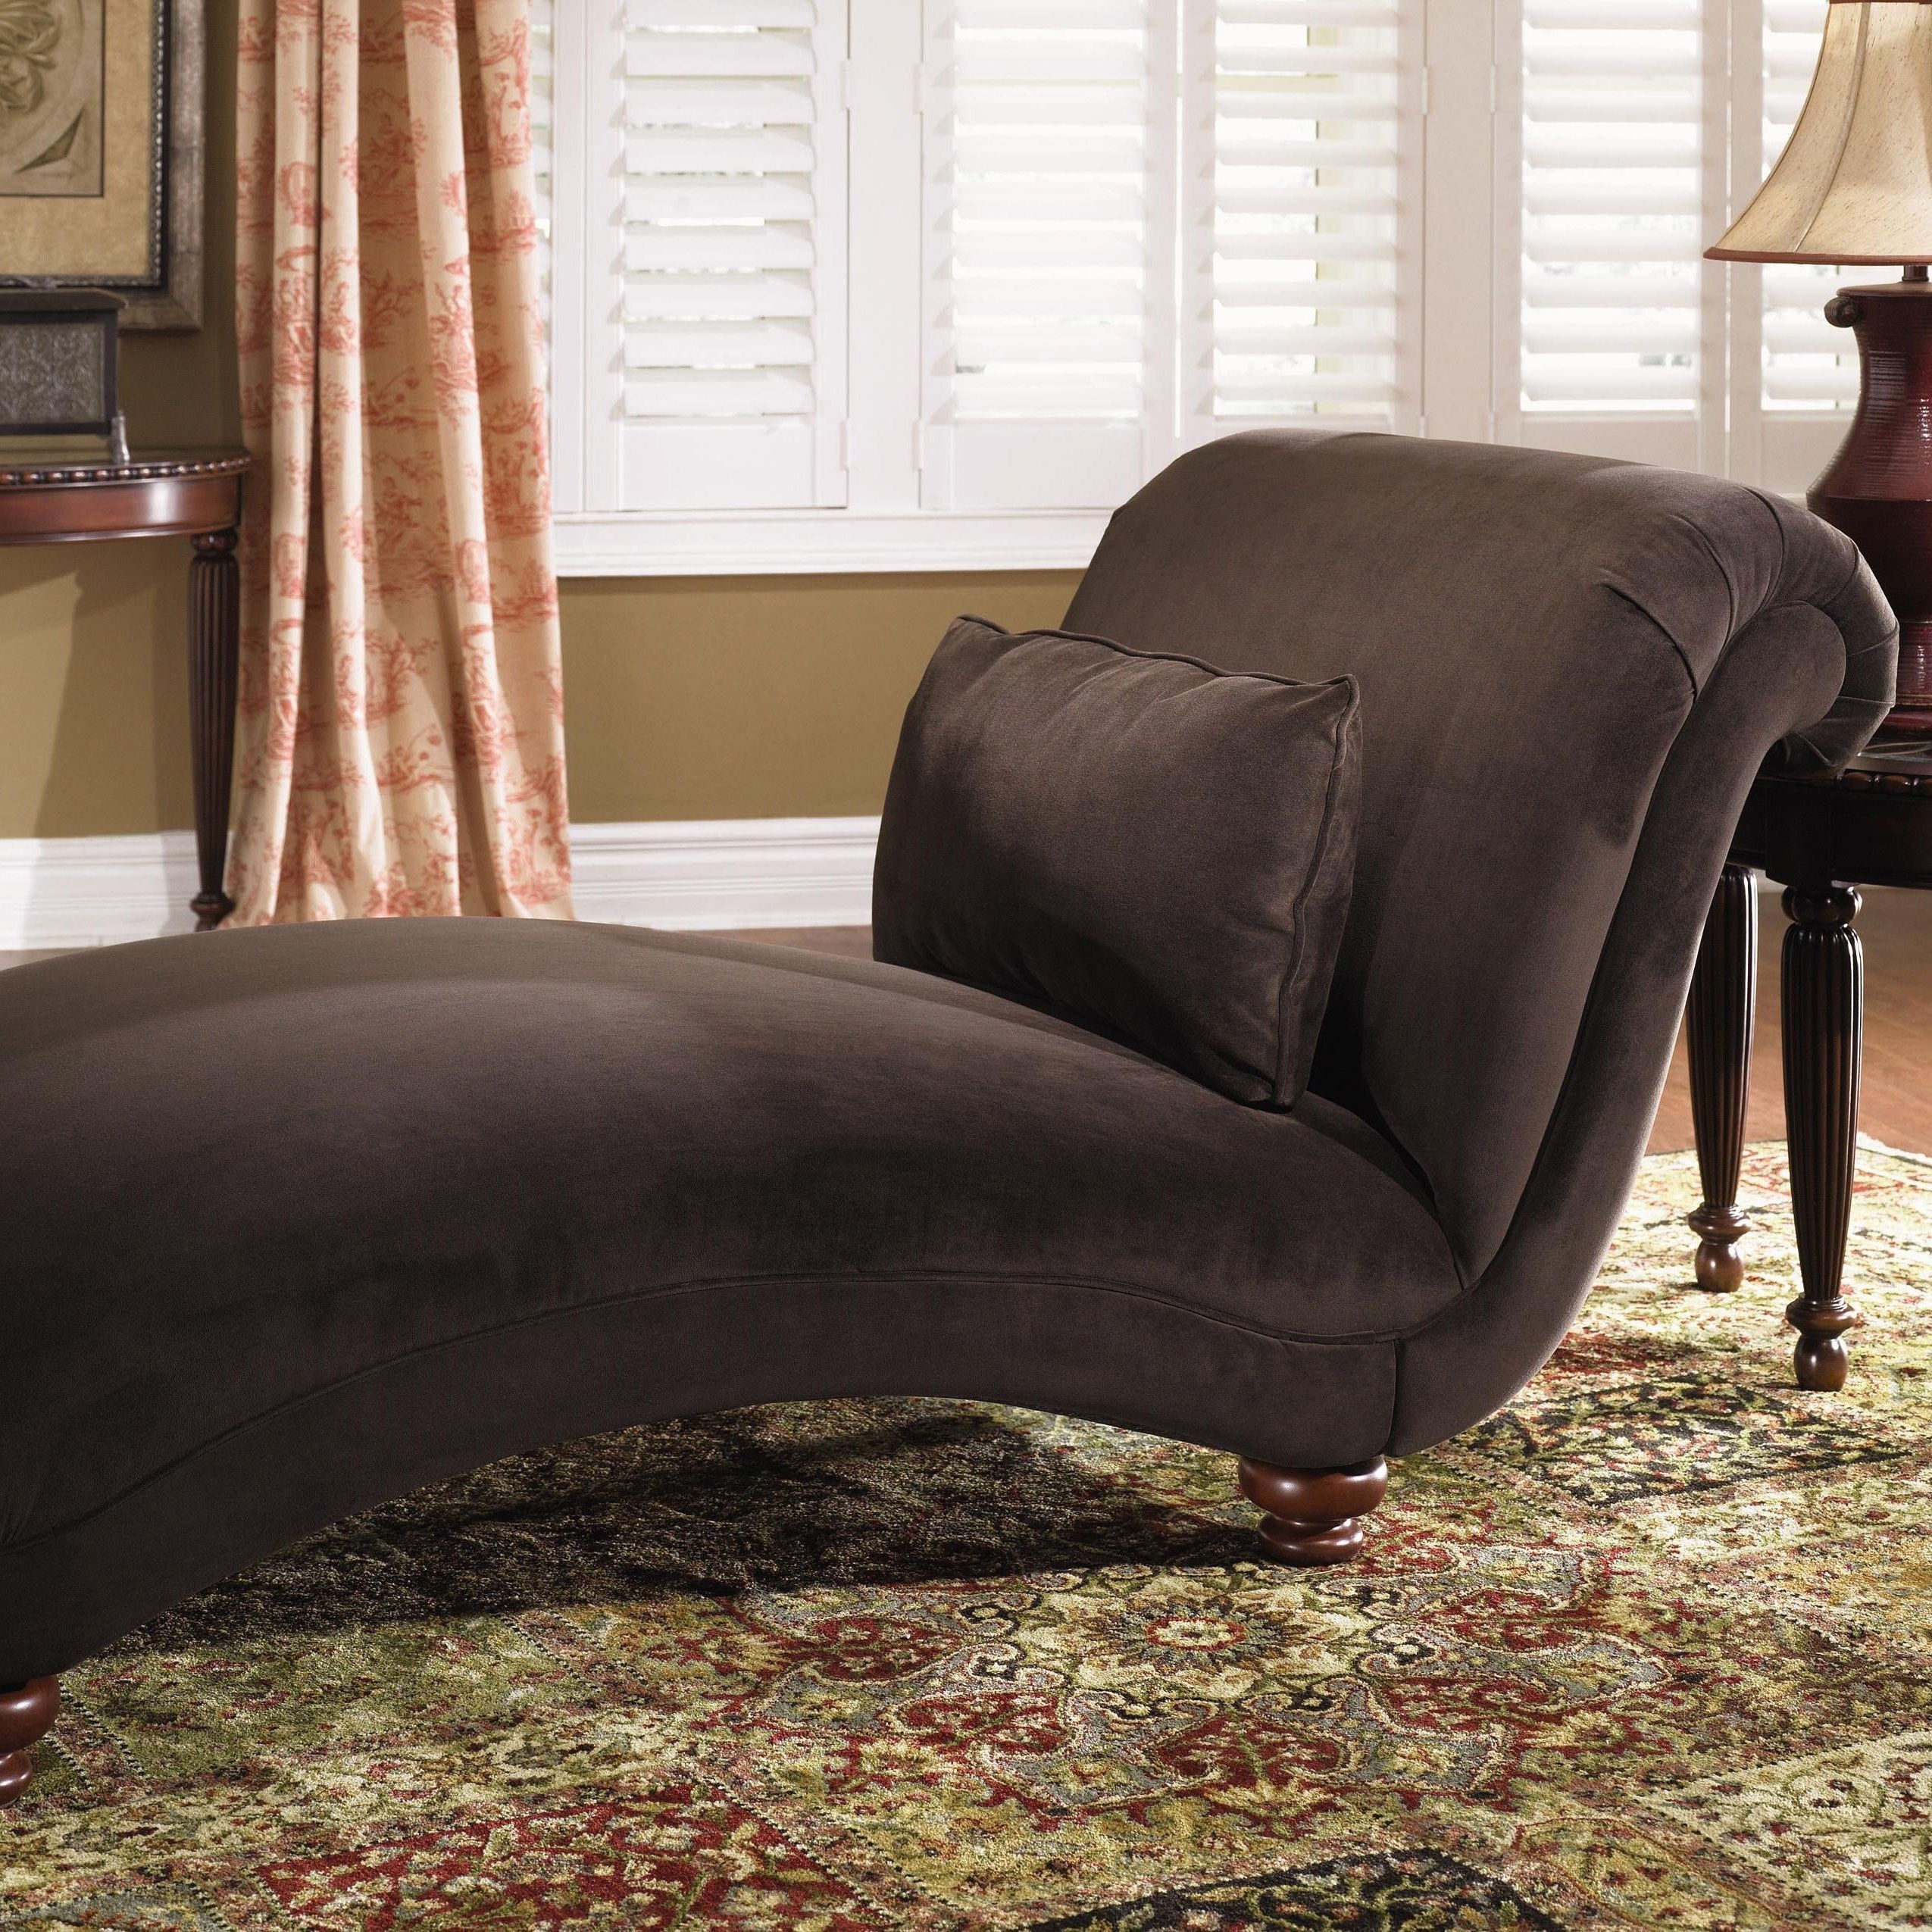 15 Ideas of Indoor Chaise Lounge Slipcovers